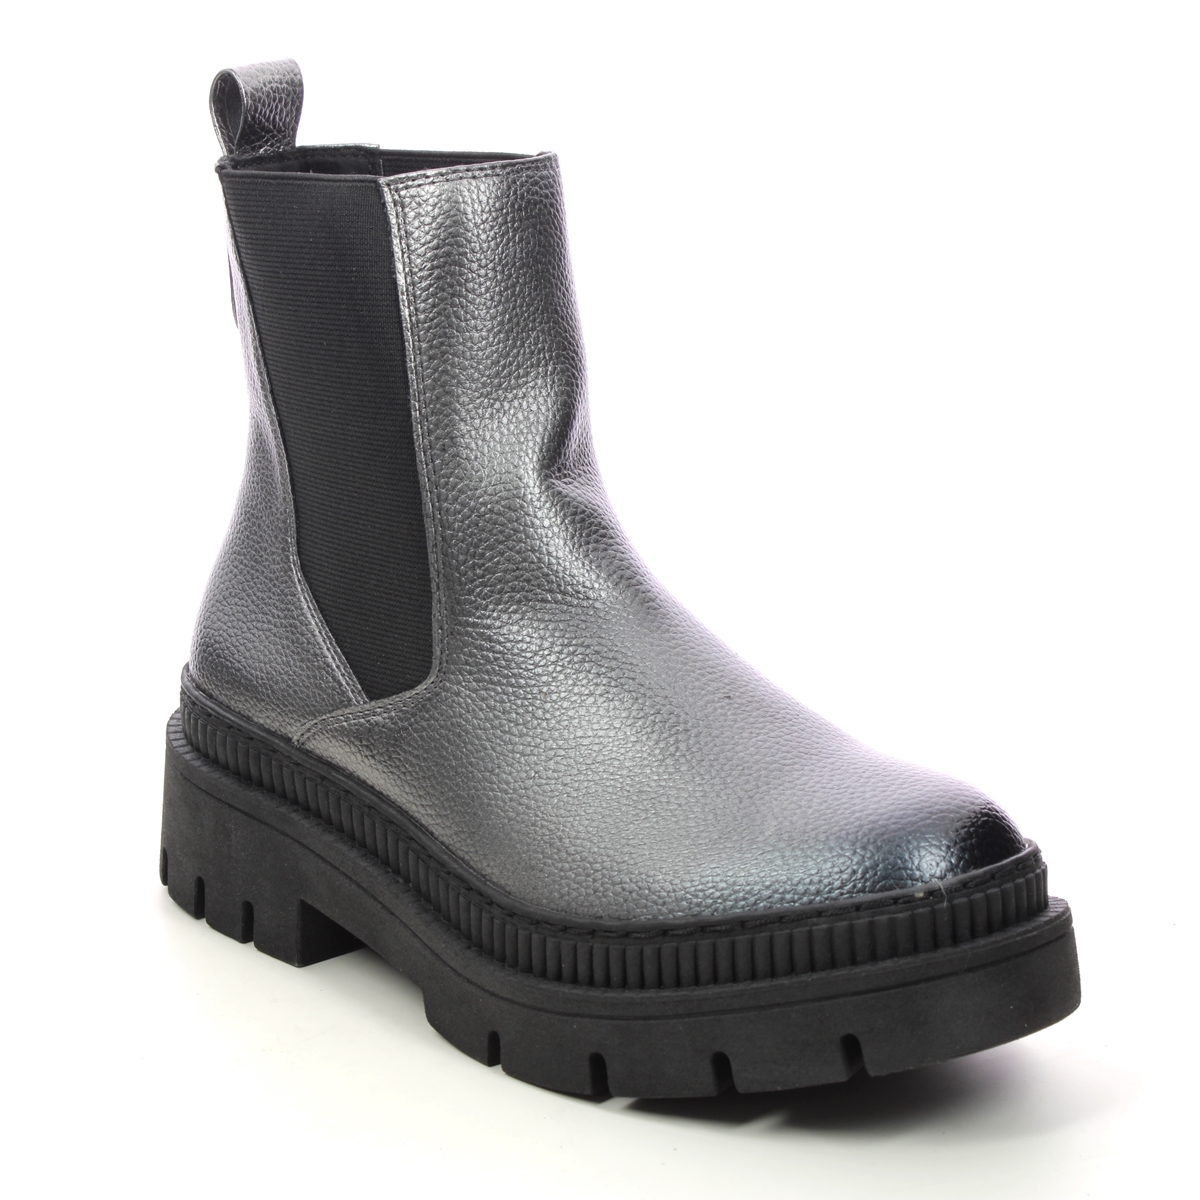 Marco Tozzi Rostra Chelsea Pewter Womens Chelsea Boots 25822-41-915 In Size 37 In Plain Pewter